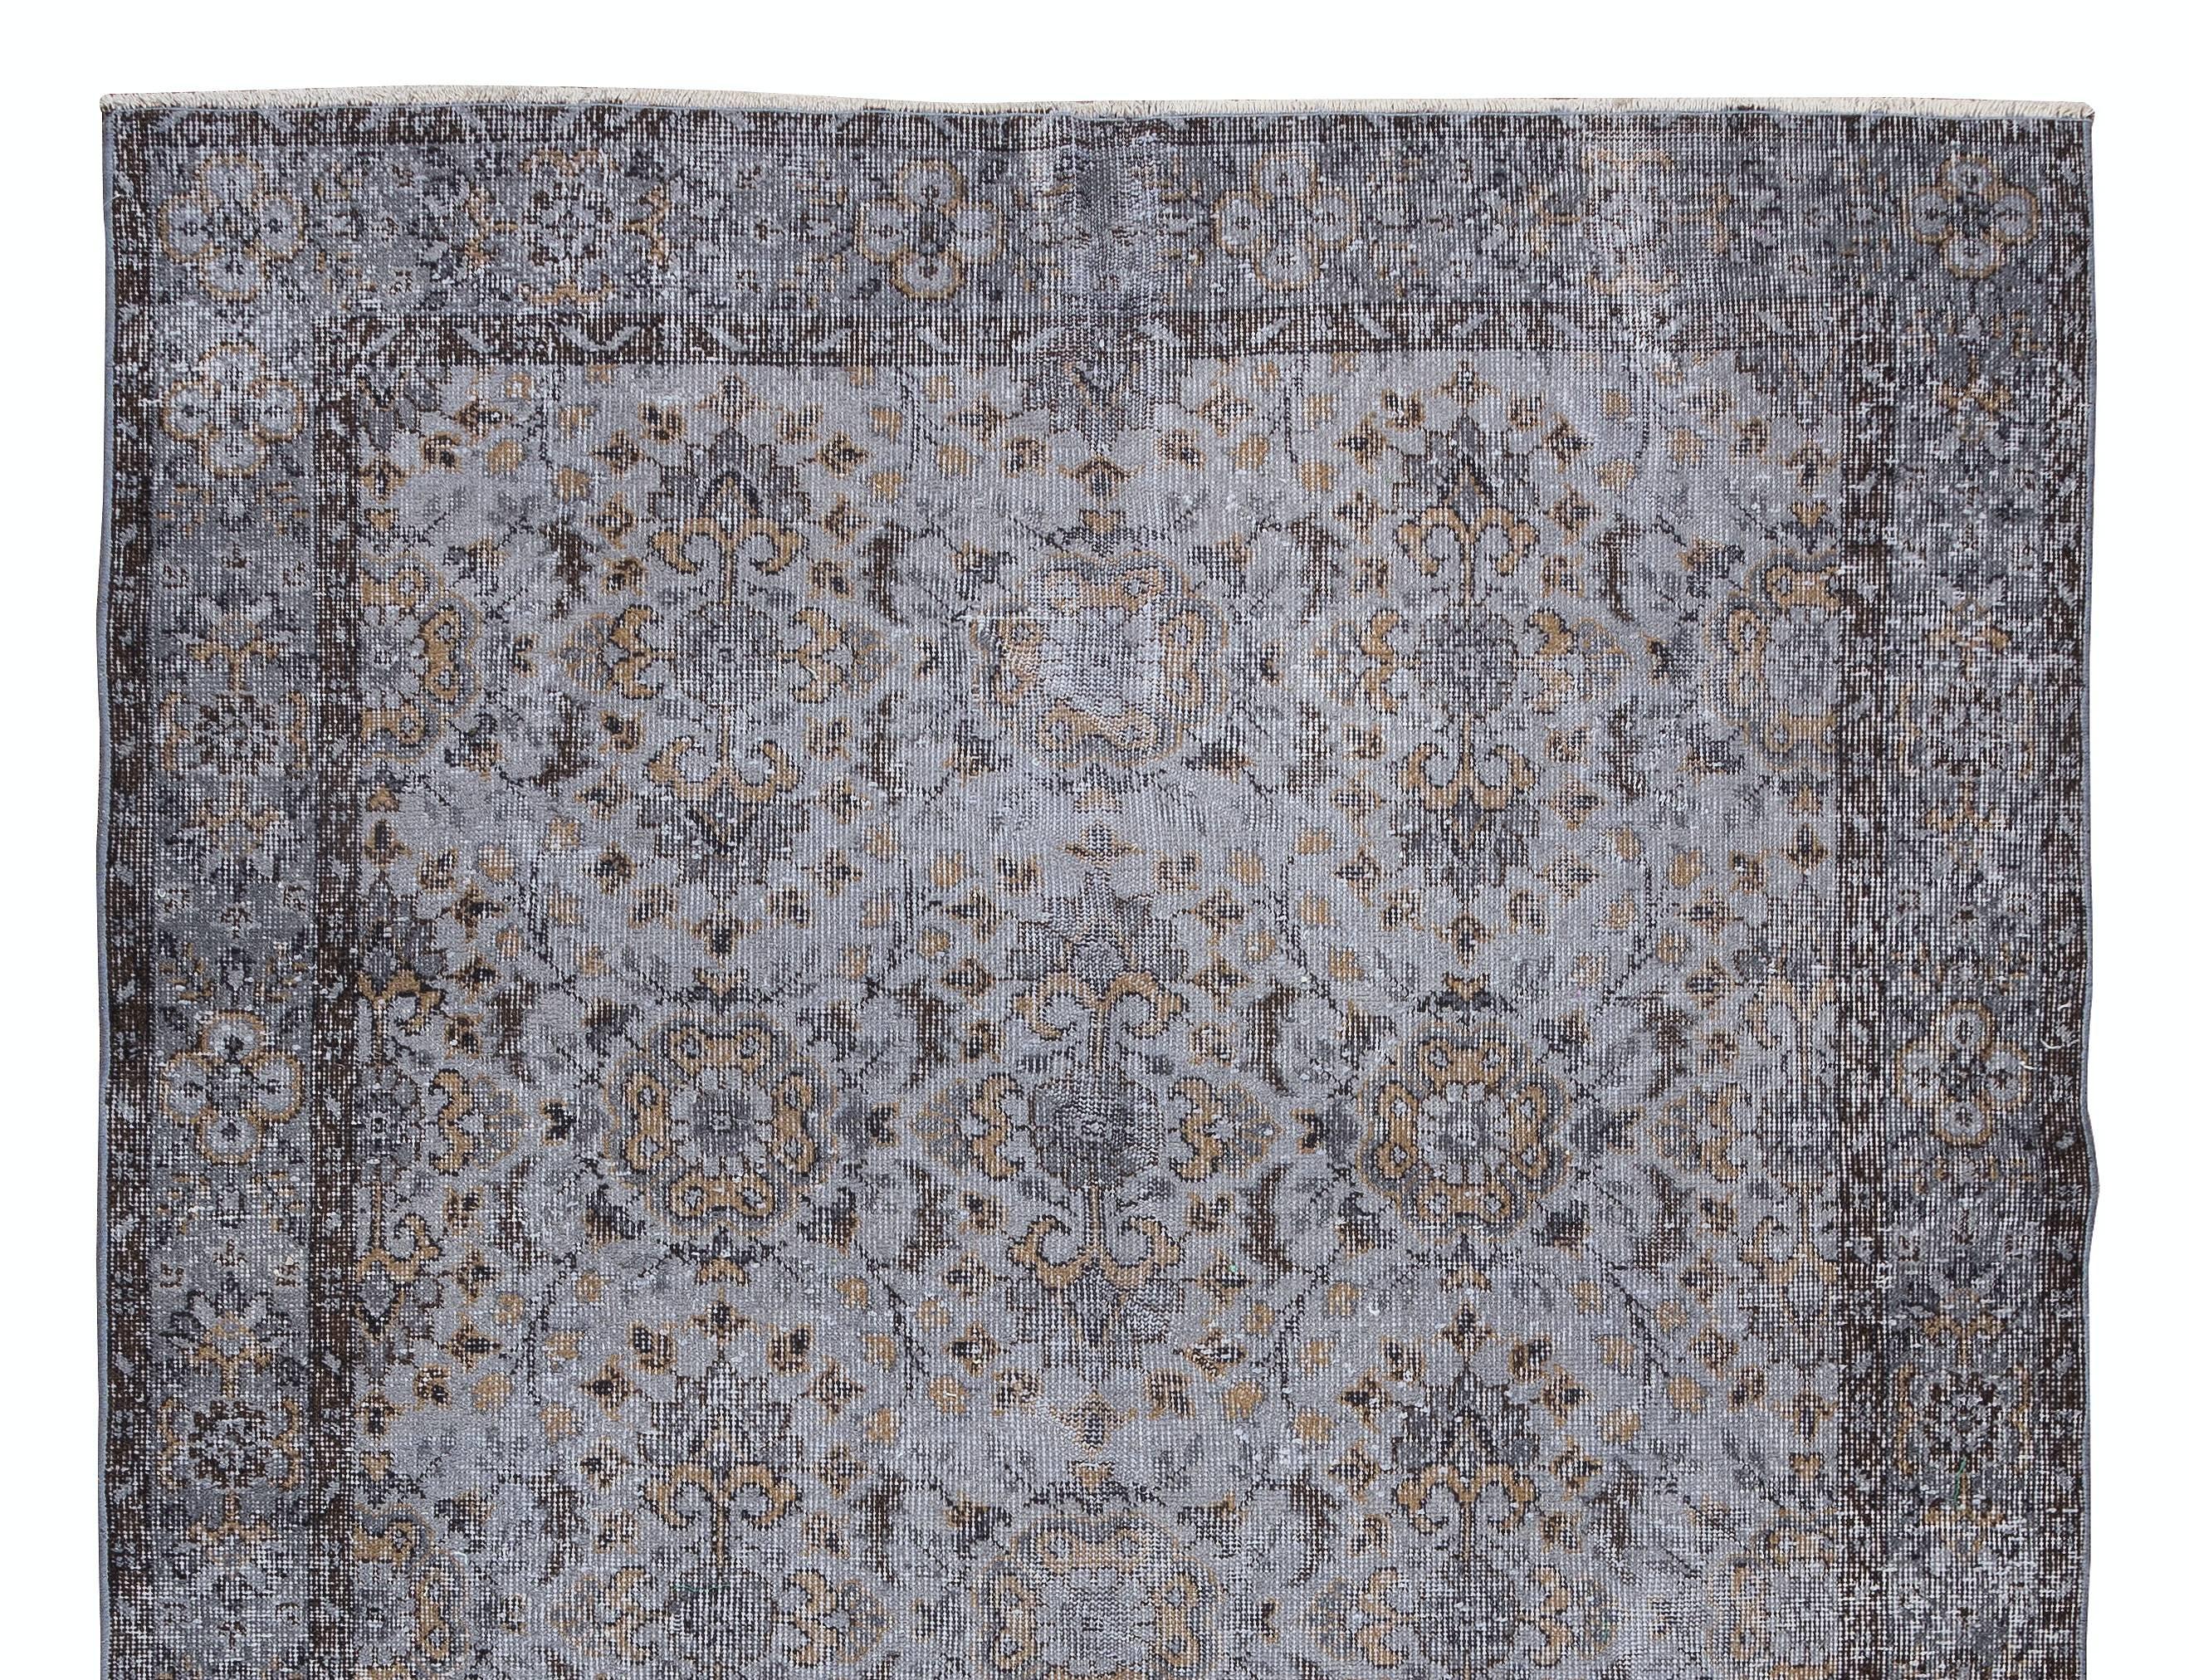 Turkish 5.5x9 Ft Vintage Floral Area Rug in Gray, Hand Knotted in Turkey. Modern Carpet For Sale